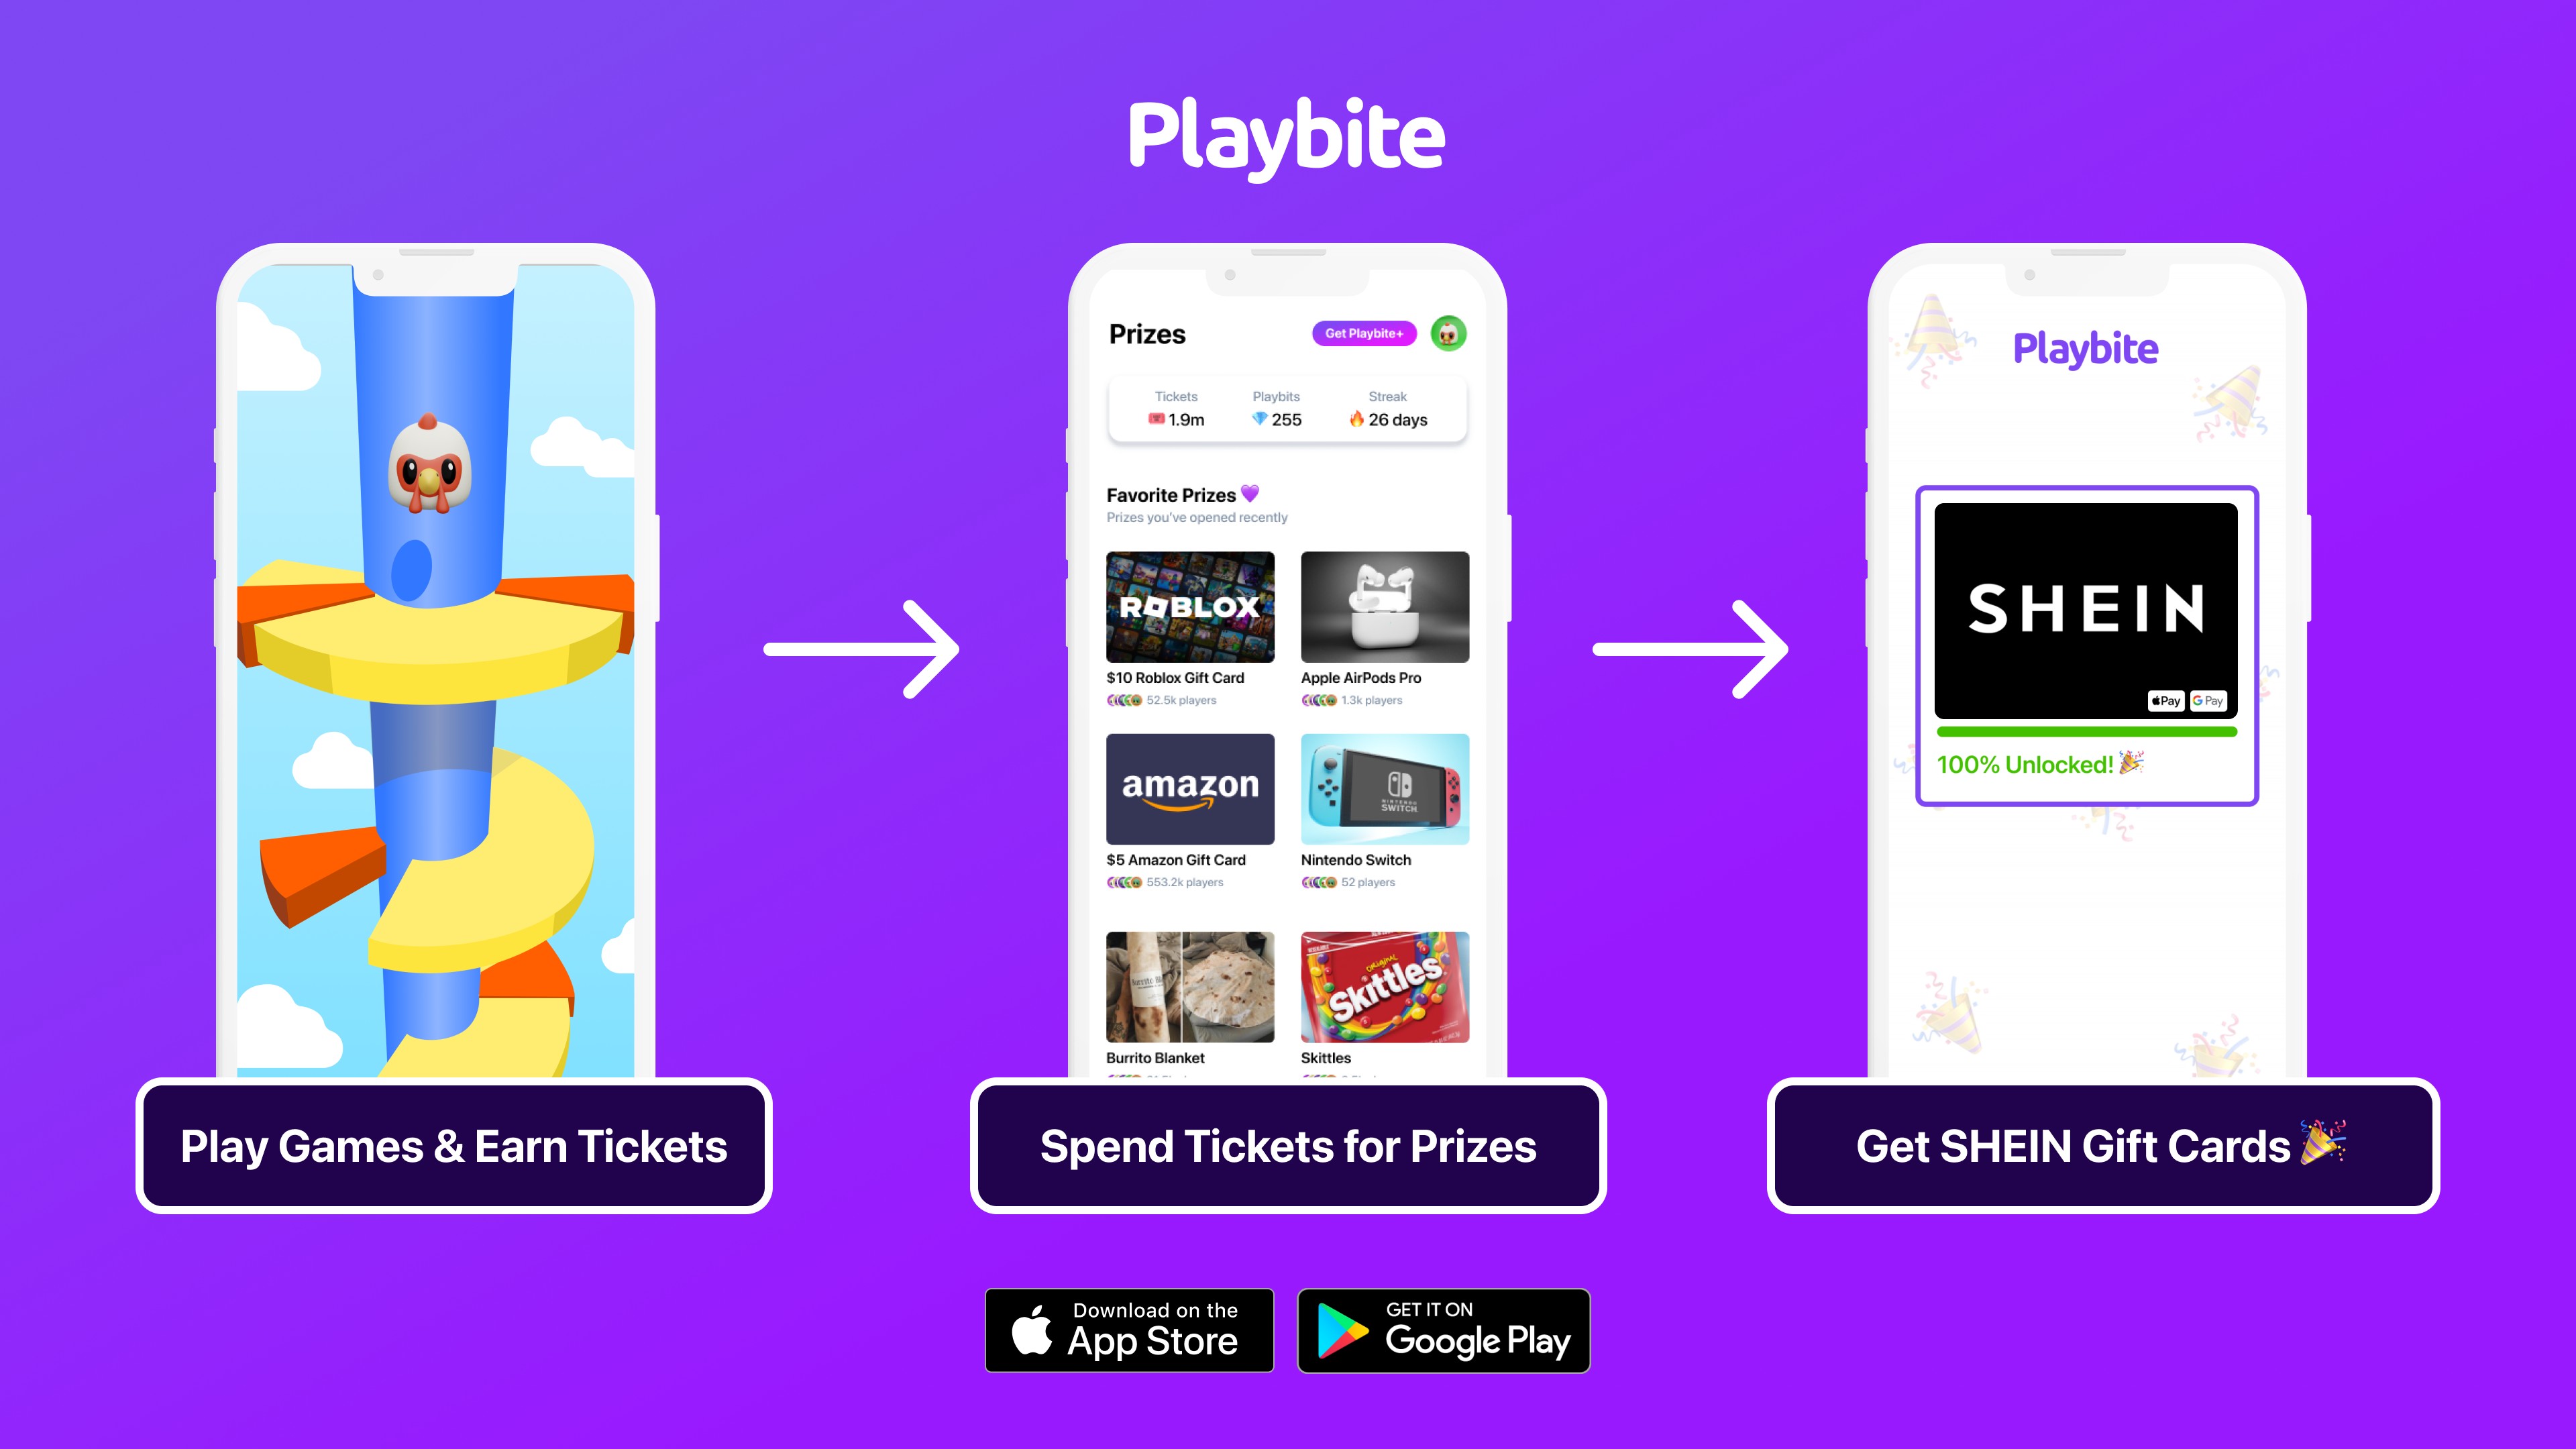 Win SHEIN gift cards by playing games on Playbite!